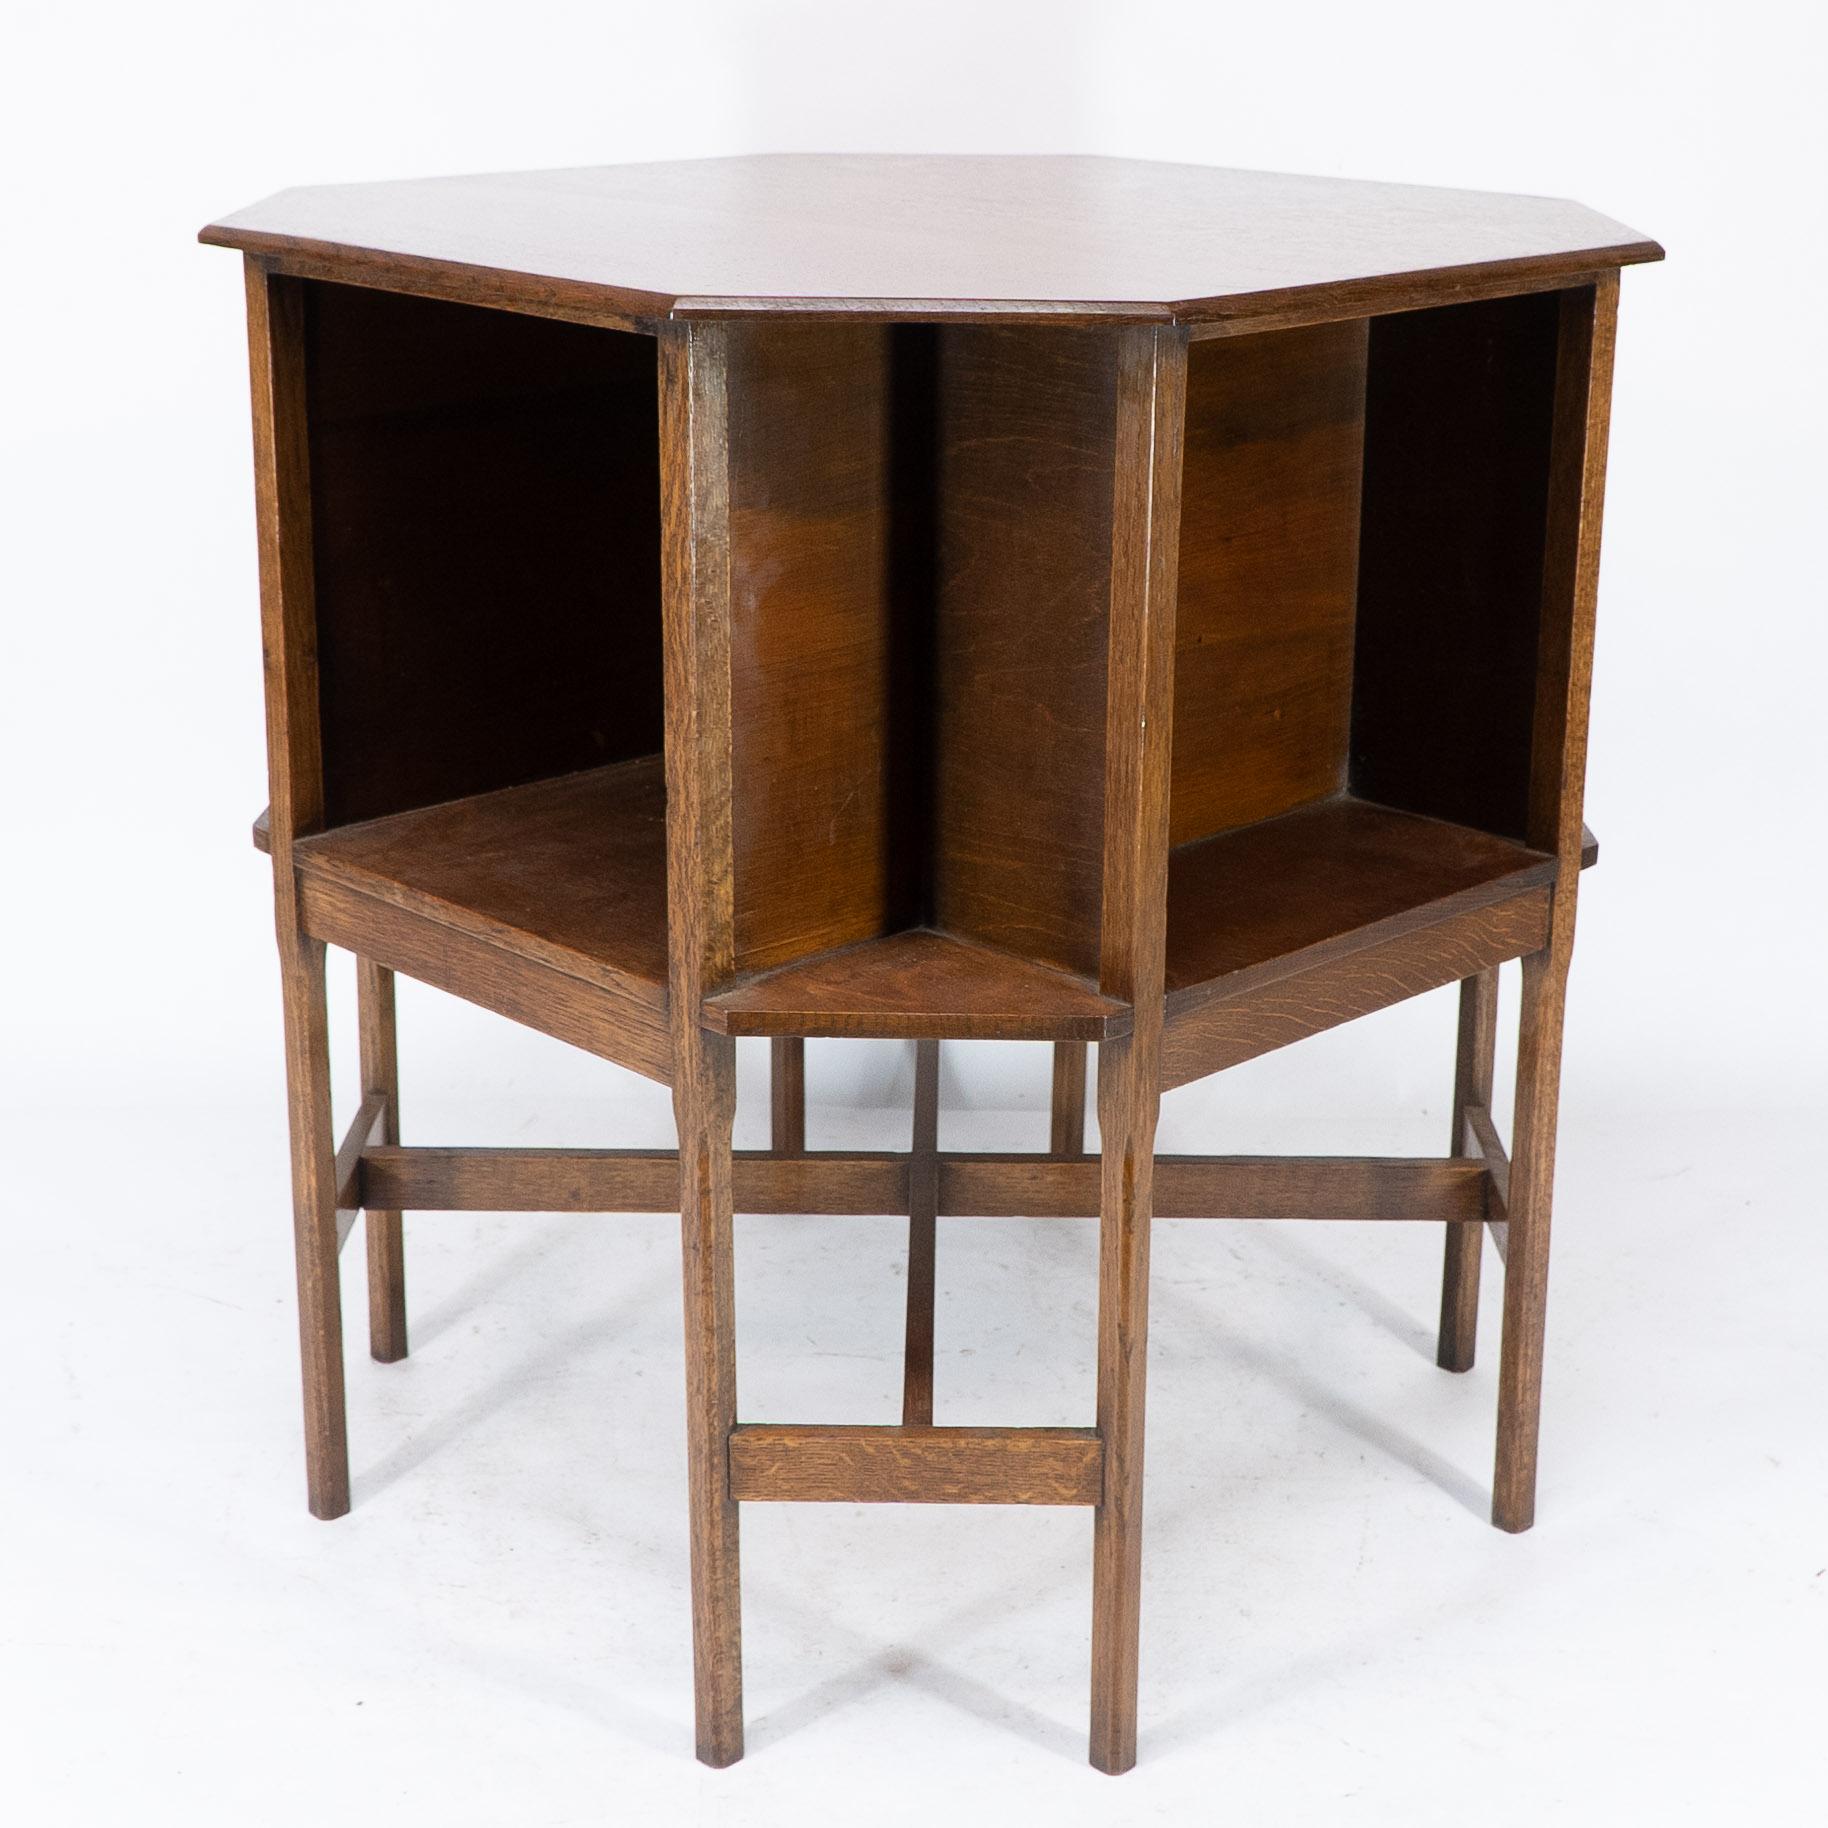 Early 20th Century Ambrose Heals Attri, An Arts & Crafts Oak Octagonal Book Table with Eight Legs For Sale